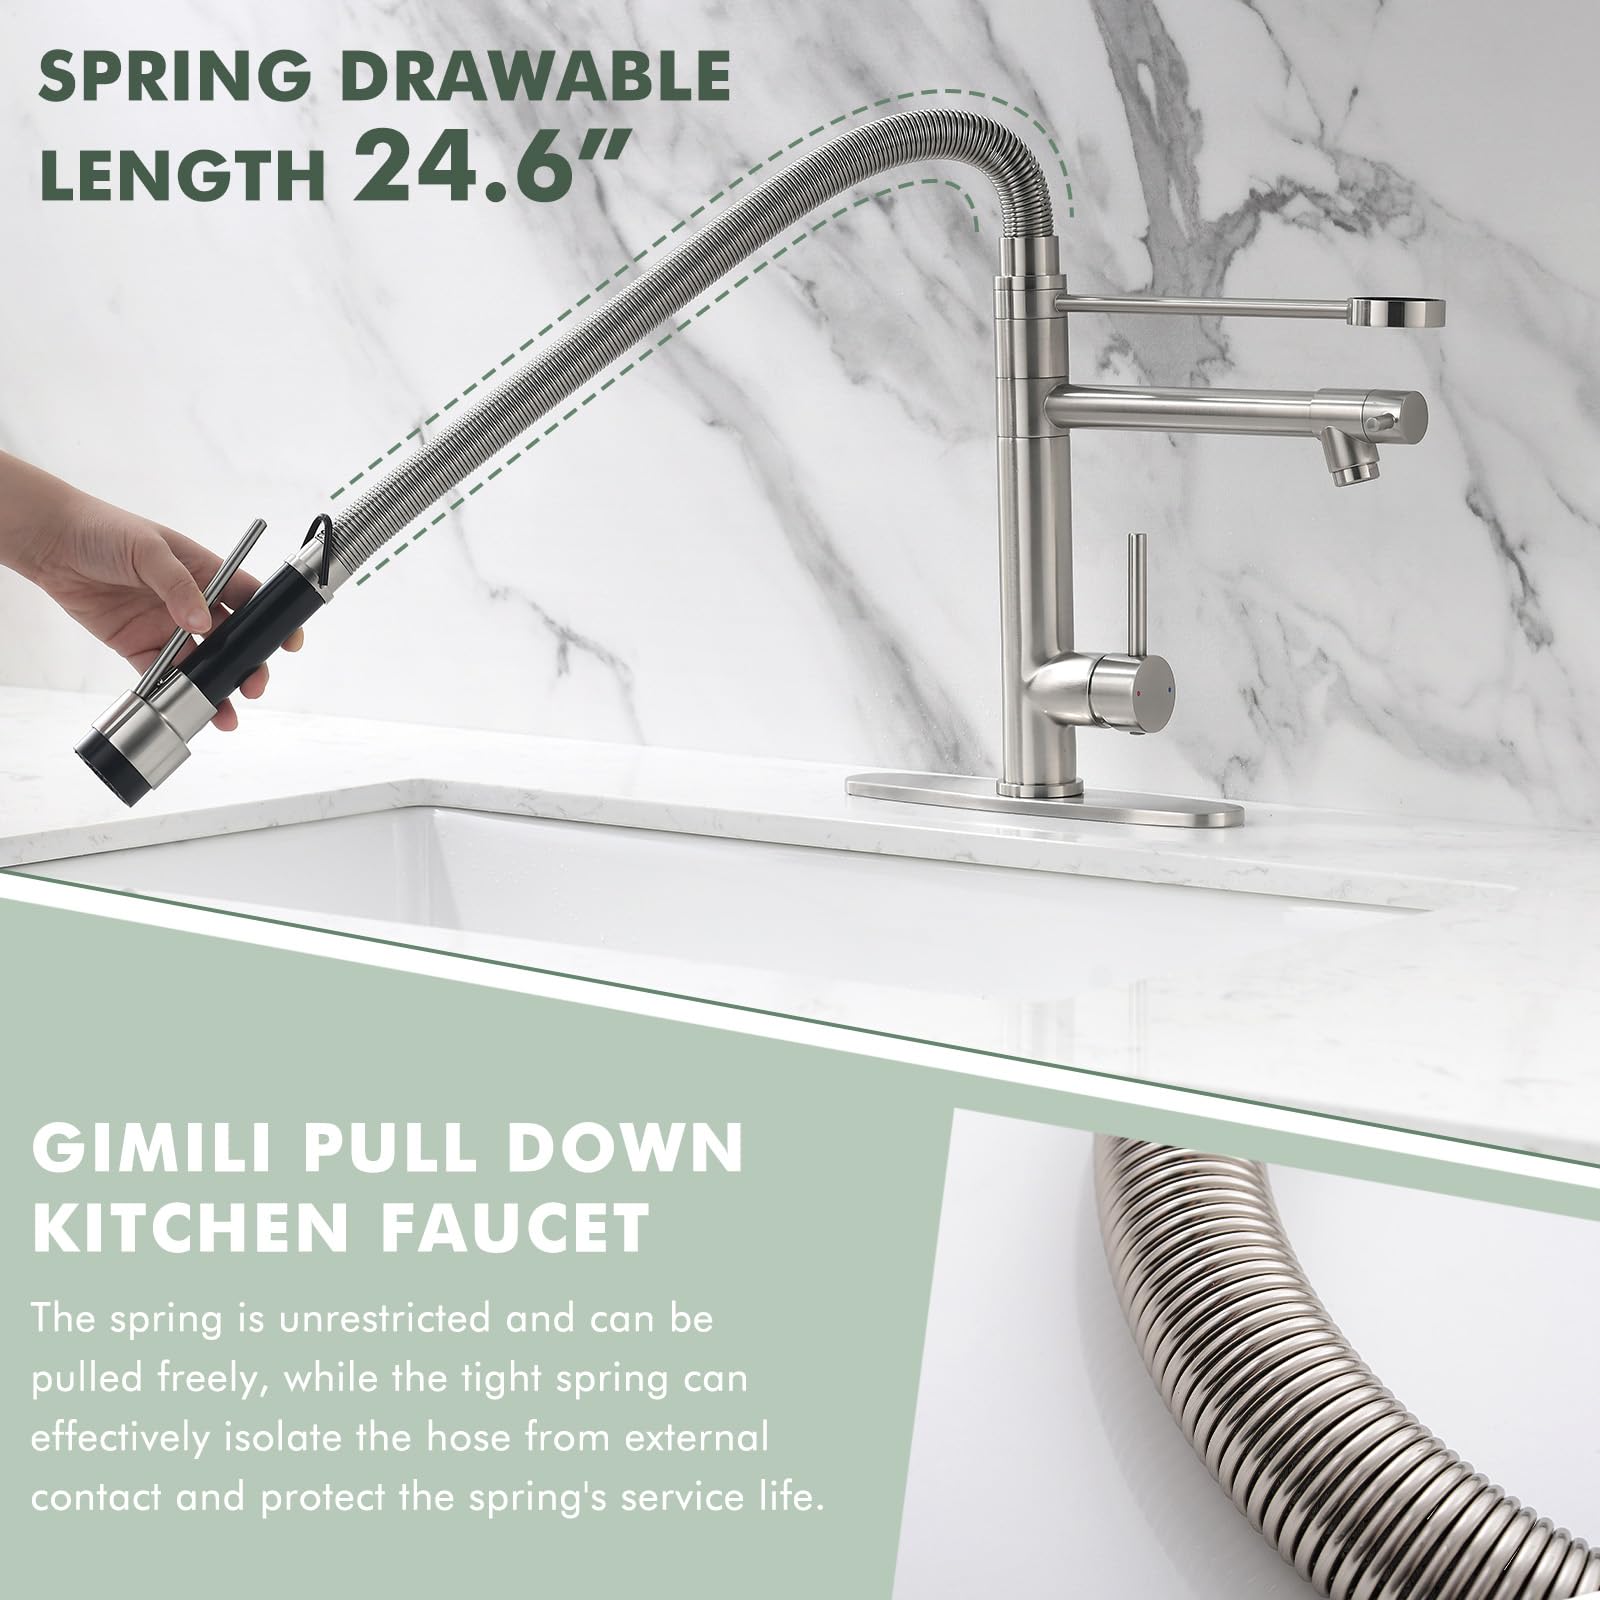 GIMILI Kitchen Faucet with Pull Down Sprayer Commercial Kitchen Faucet Double-Headed Single Handle Spring Stainless Steel Brushed Nickel Kitchen Sink Faucet